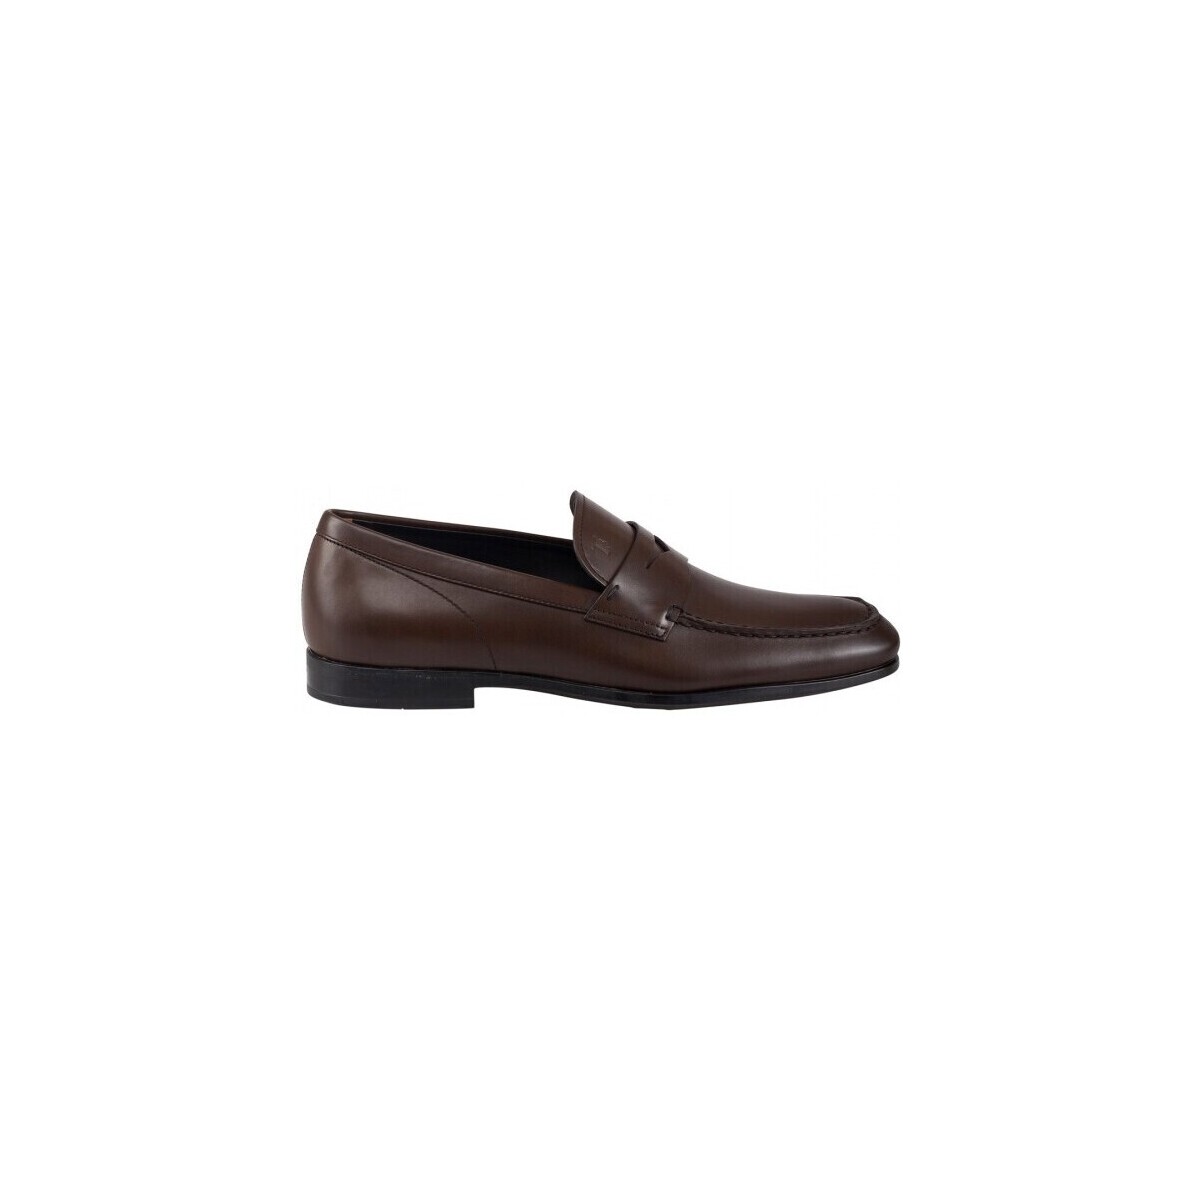 Chaussures Homme Mocassins Tod's MOCASSIN HOMME  TOD'S Marron